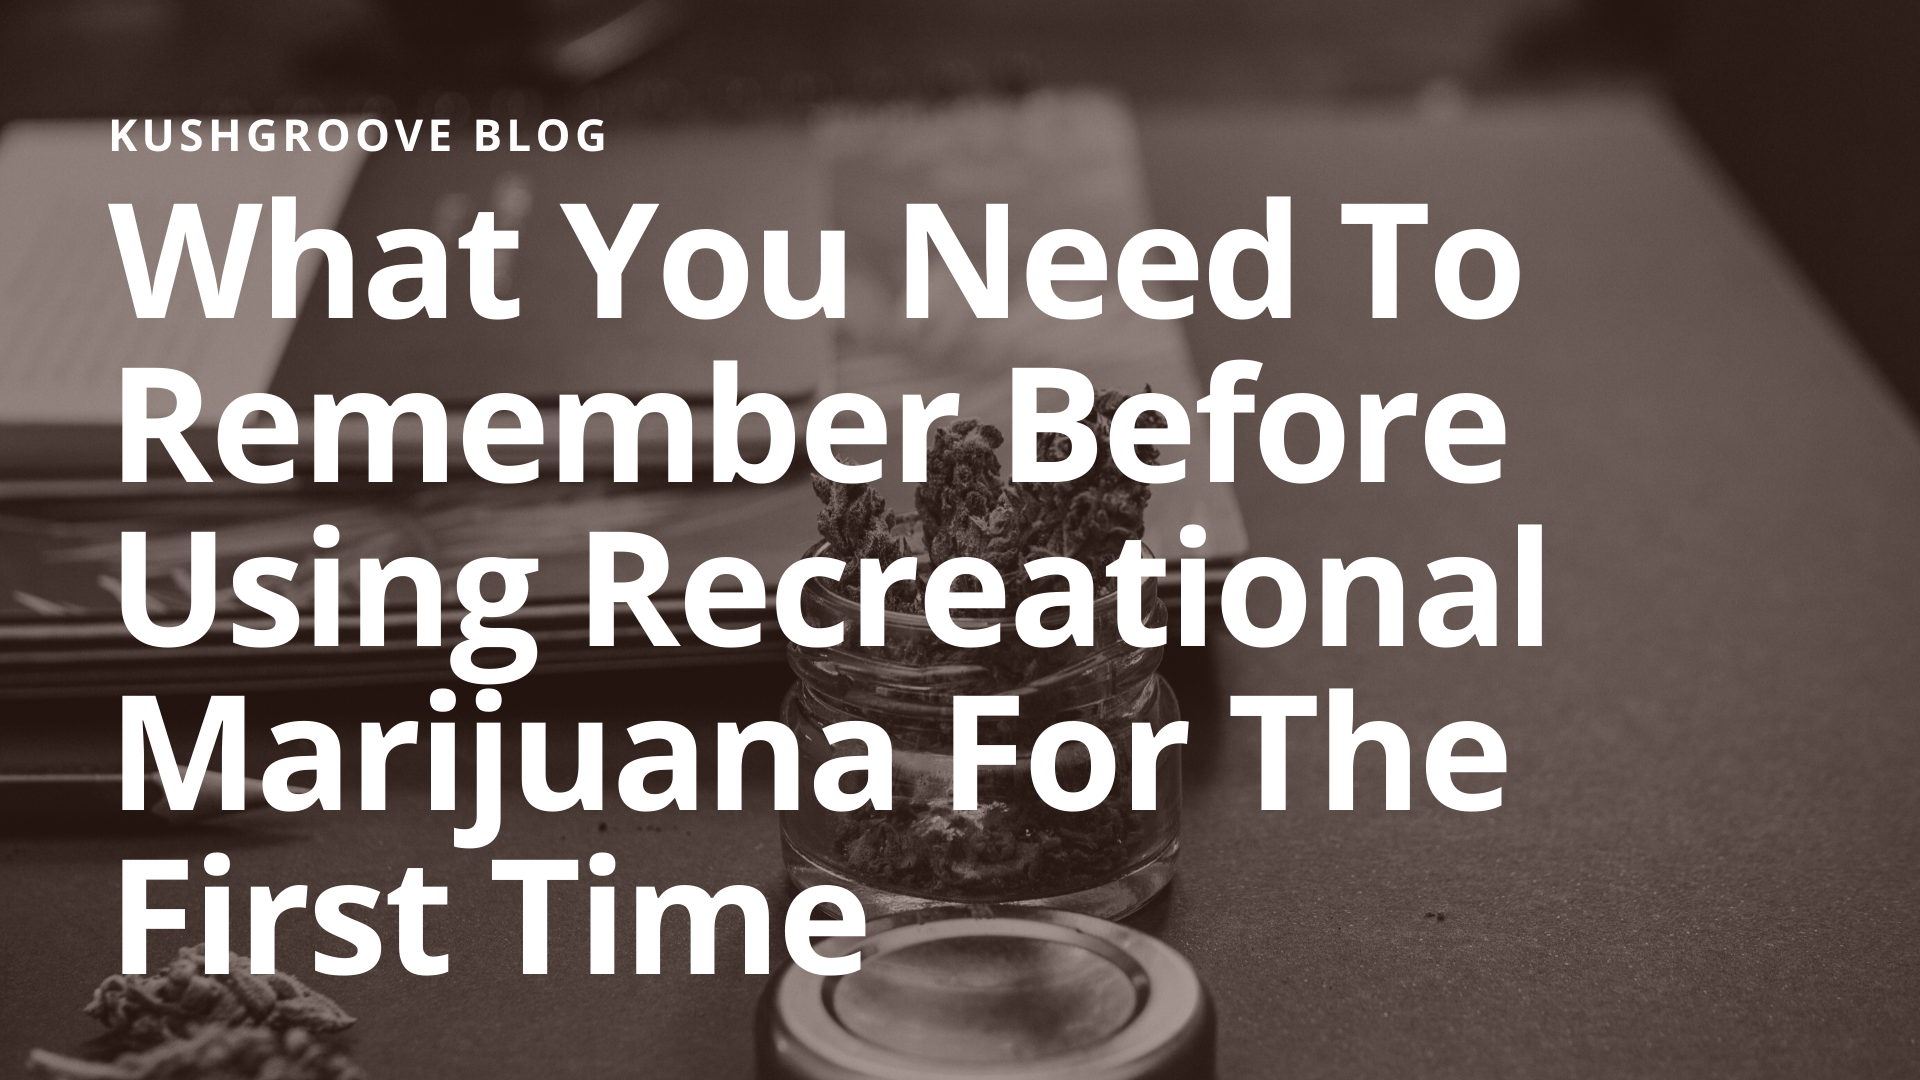 What You Need To Remember Before Using Recreational Marijuana For The First Time